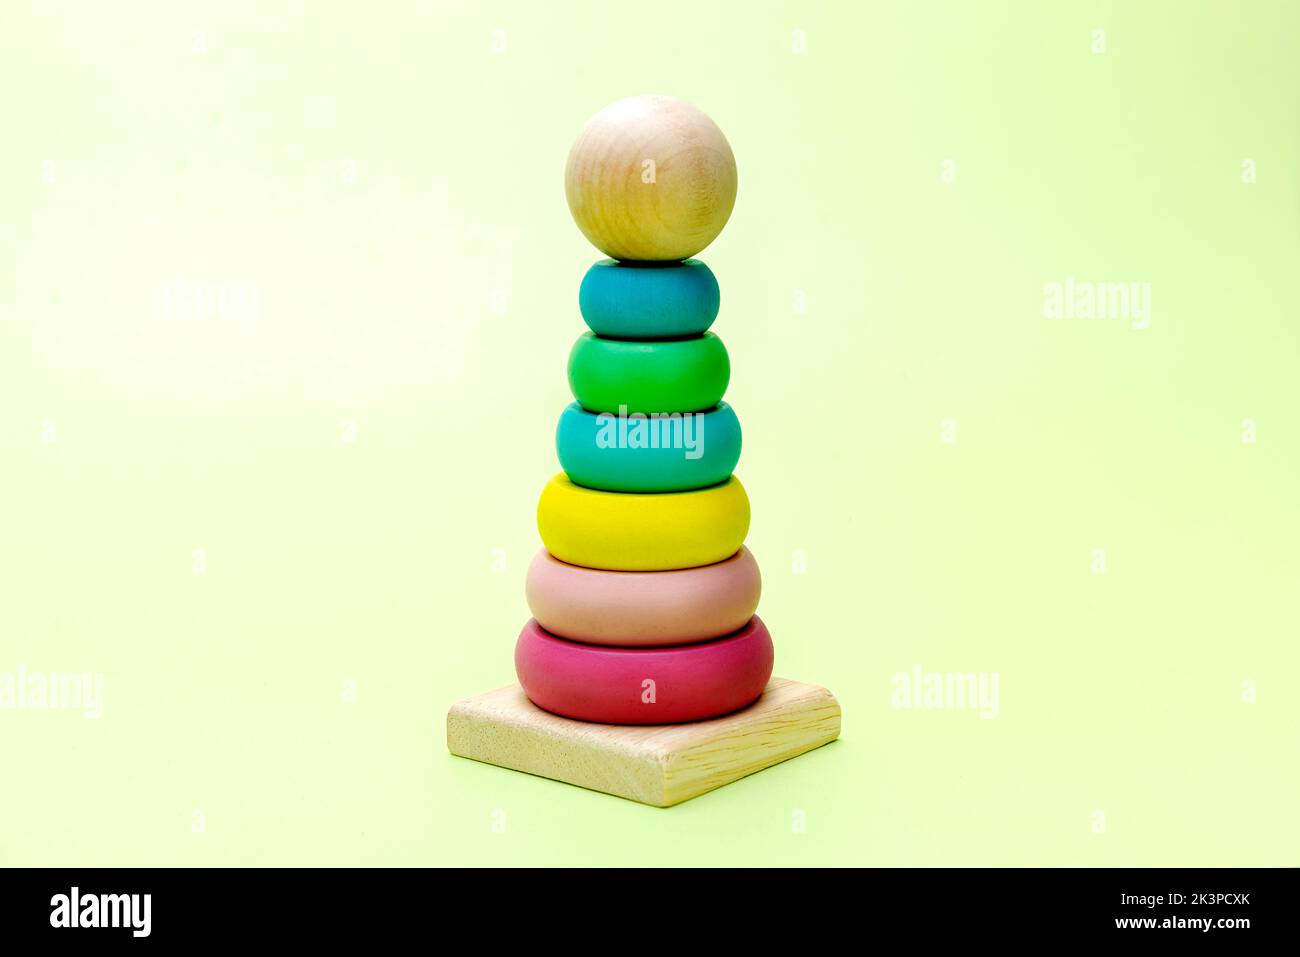 Colorful wooden pyramid toy on a colored background Stock Photo